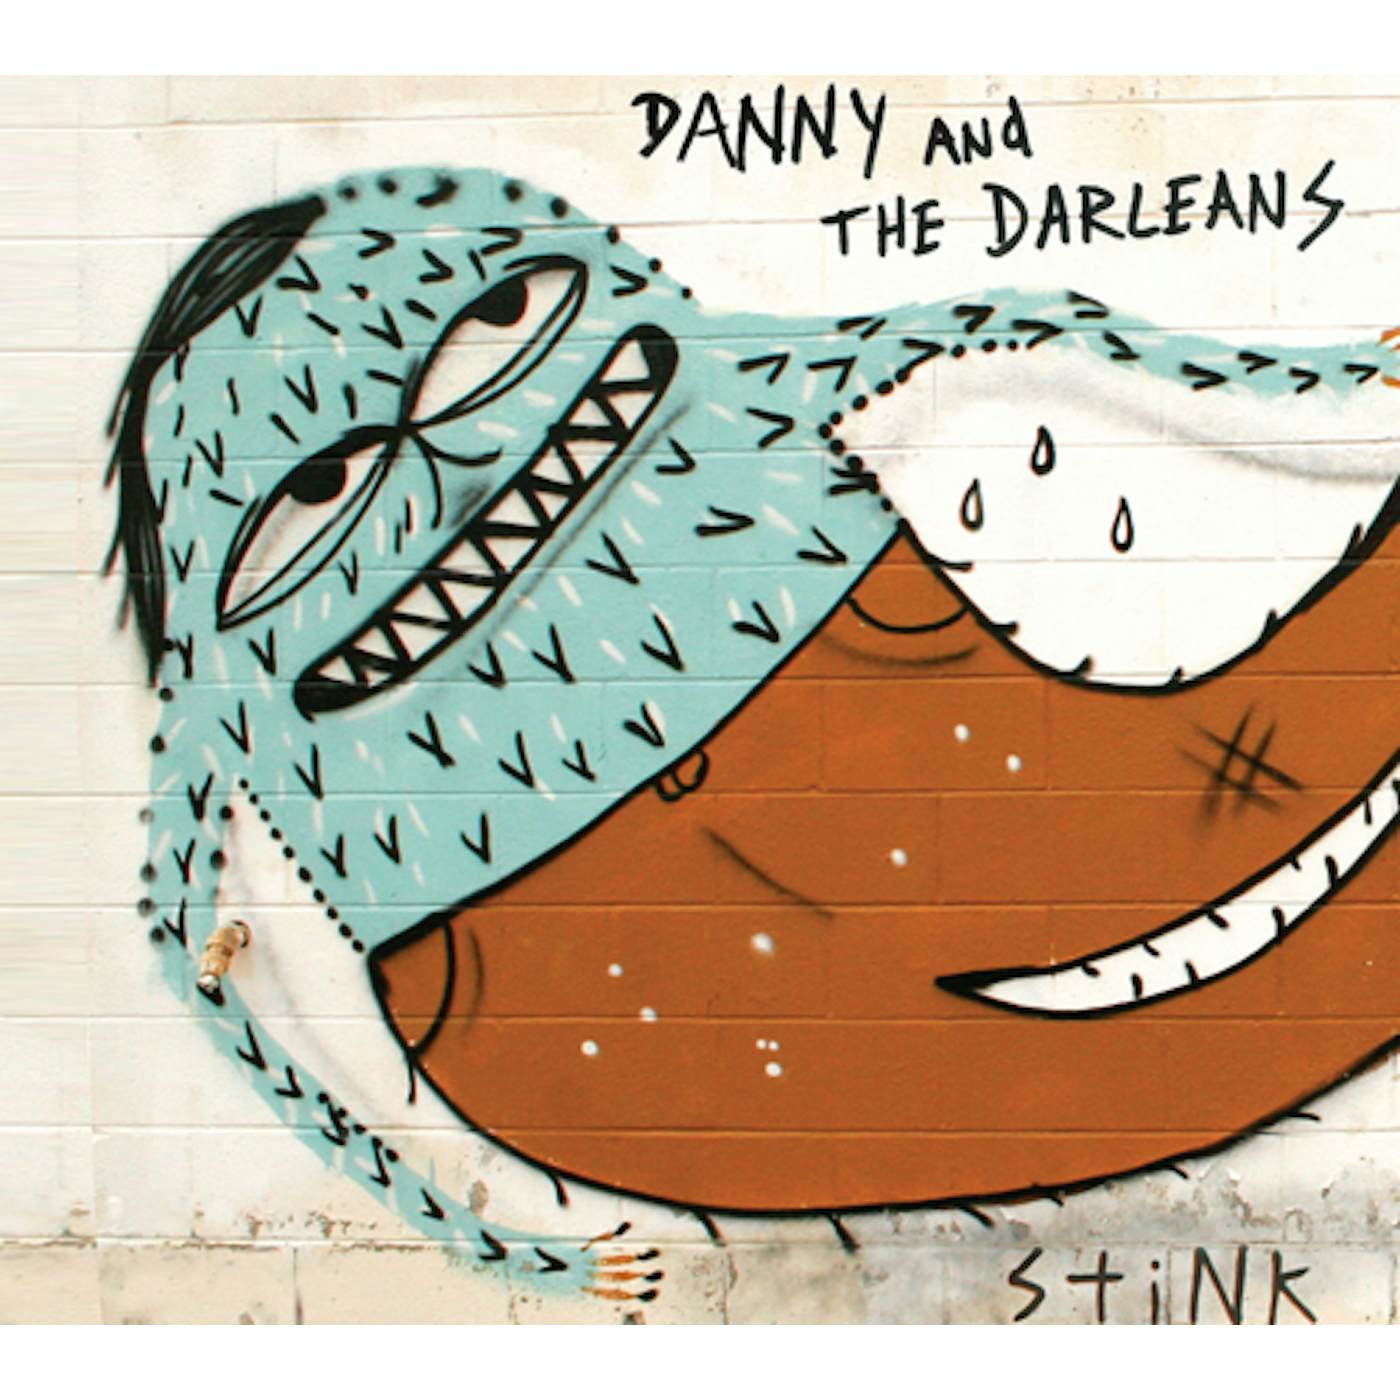 Danny and the Darleans Vinyl Record